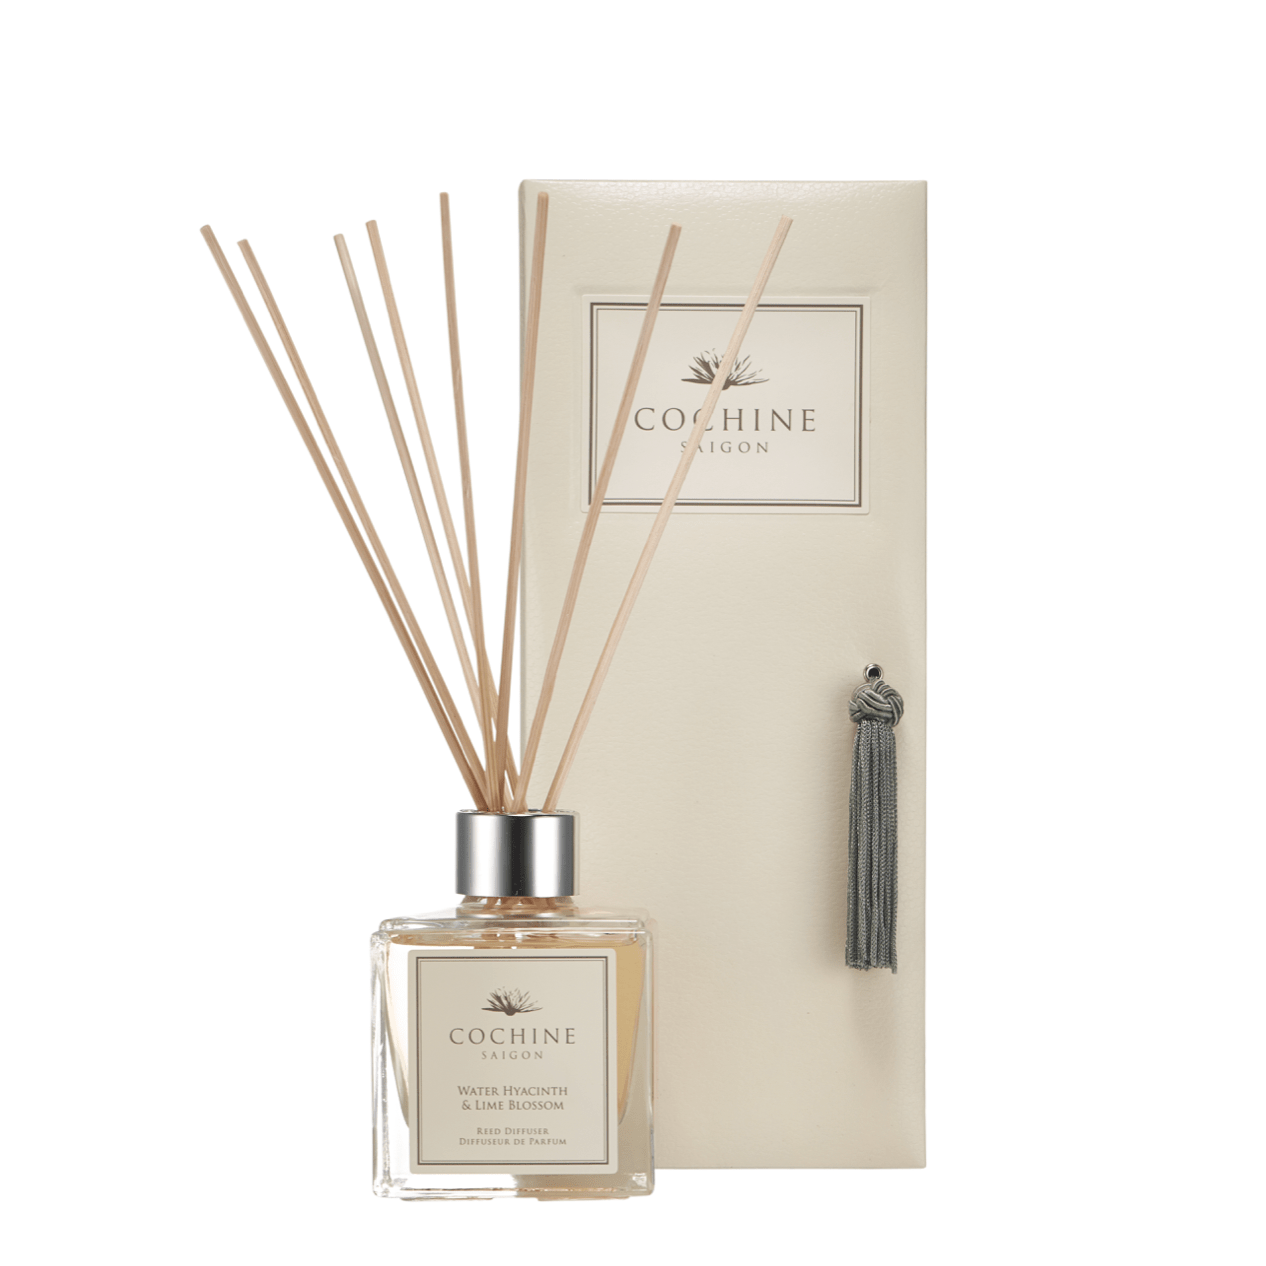 Cochine Home Fragrances of Cochines luxury scented candles and Cochine reed diffuers in Cochine Water Hyacinth & Lime Blossom Diffuser